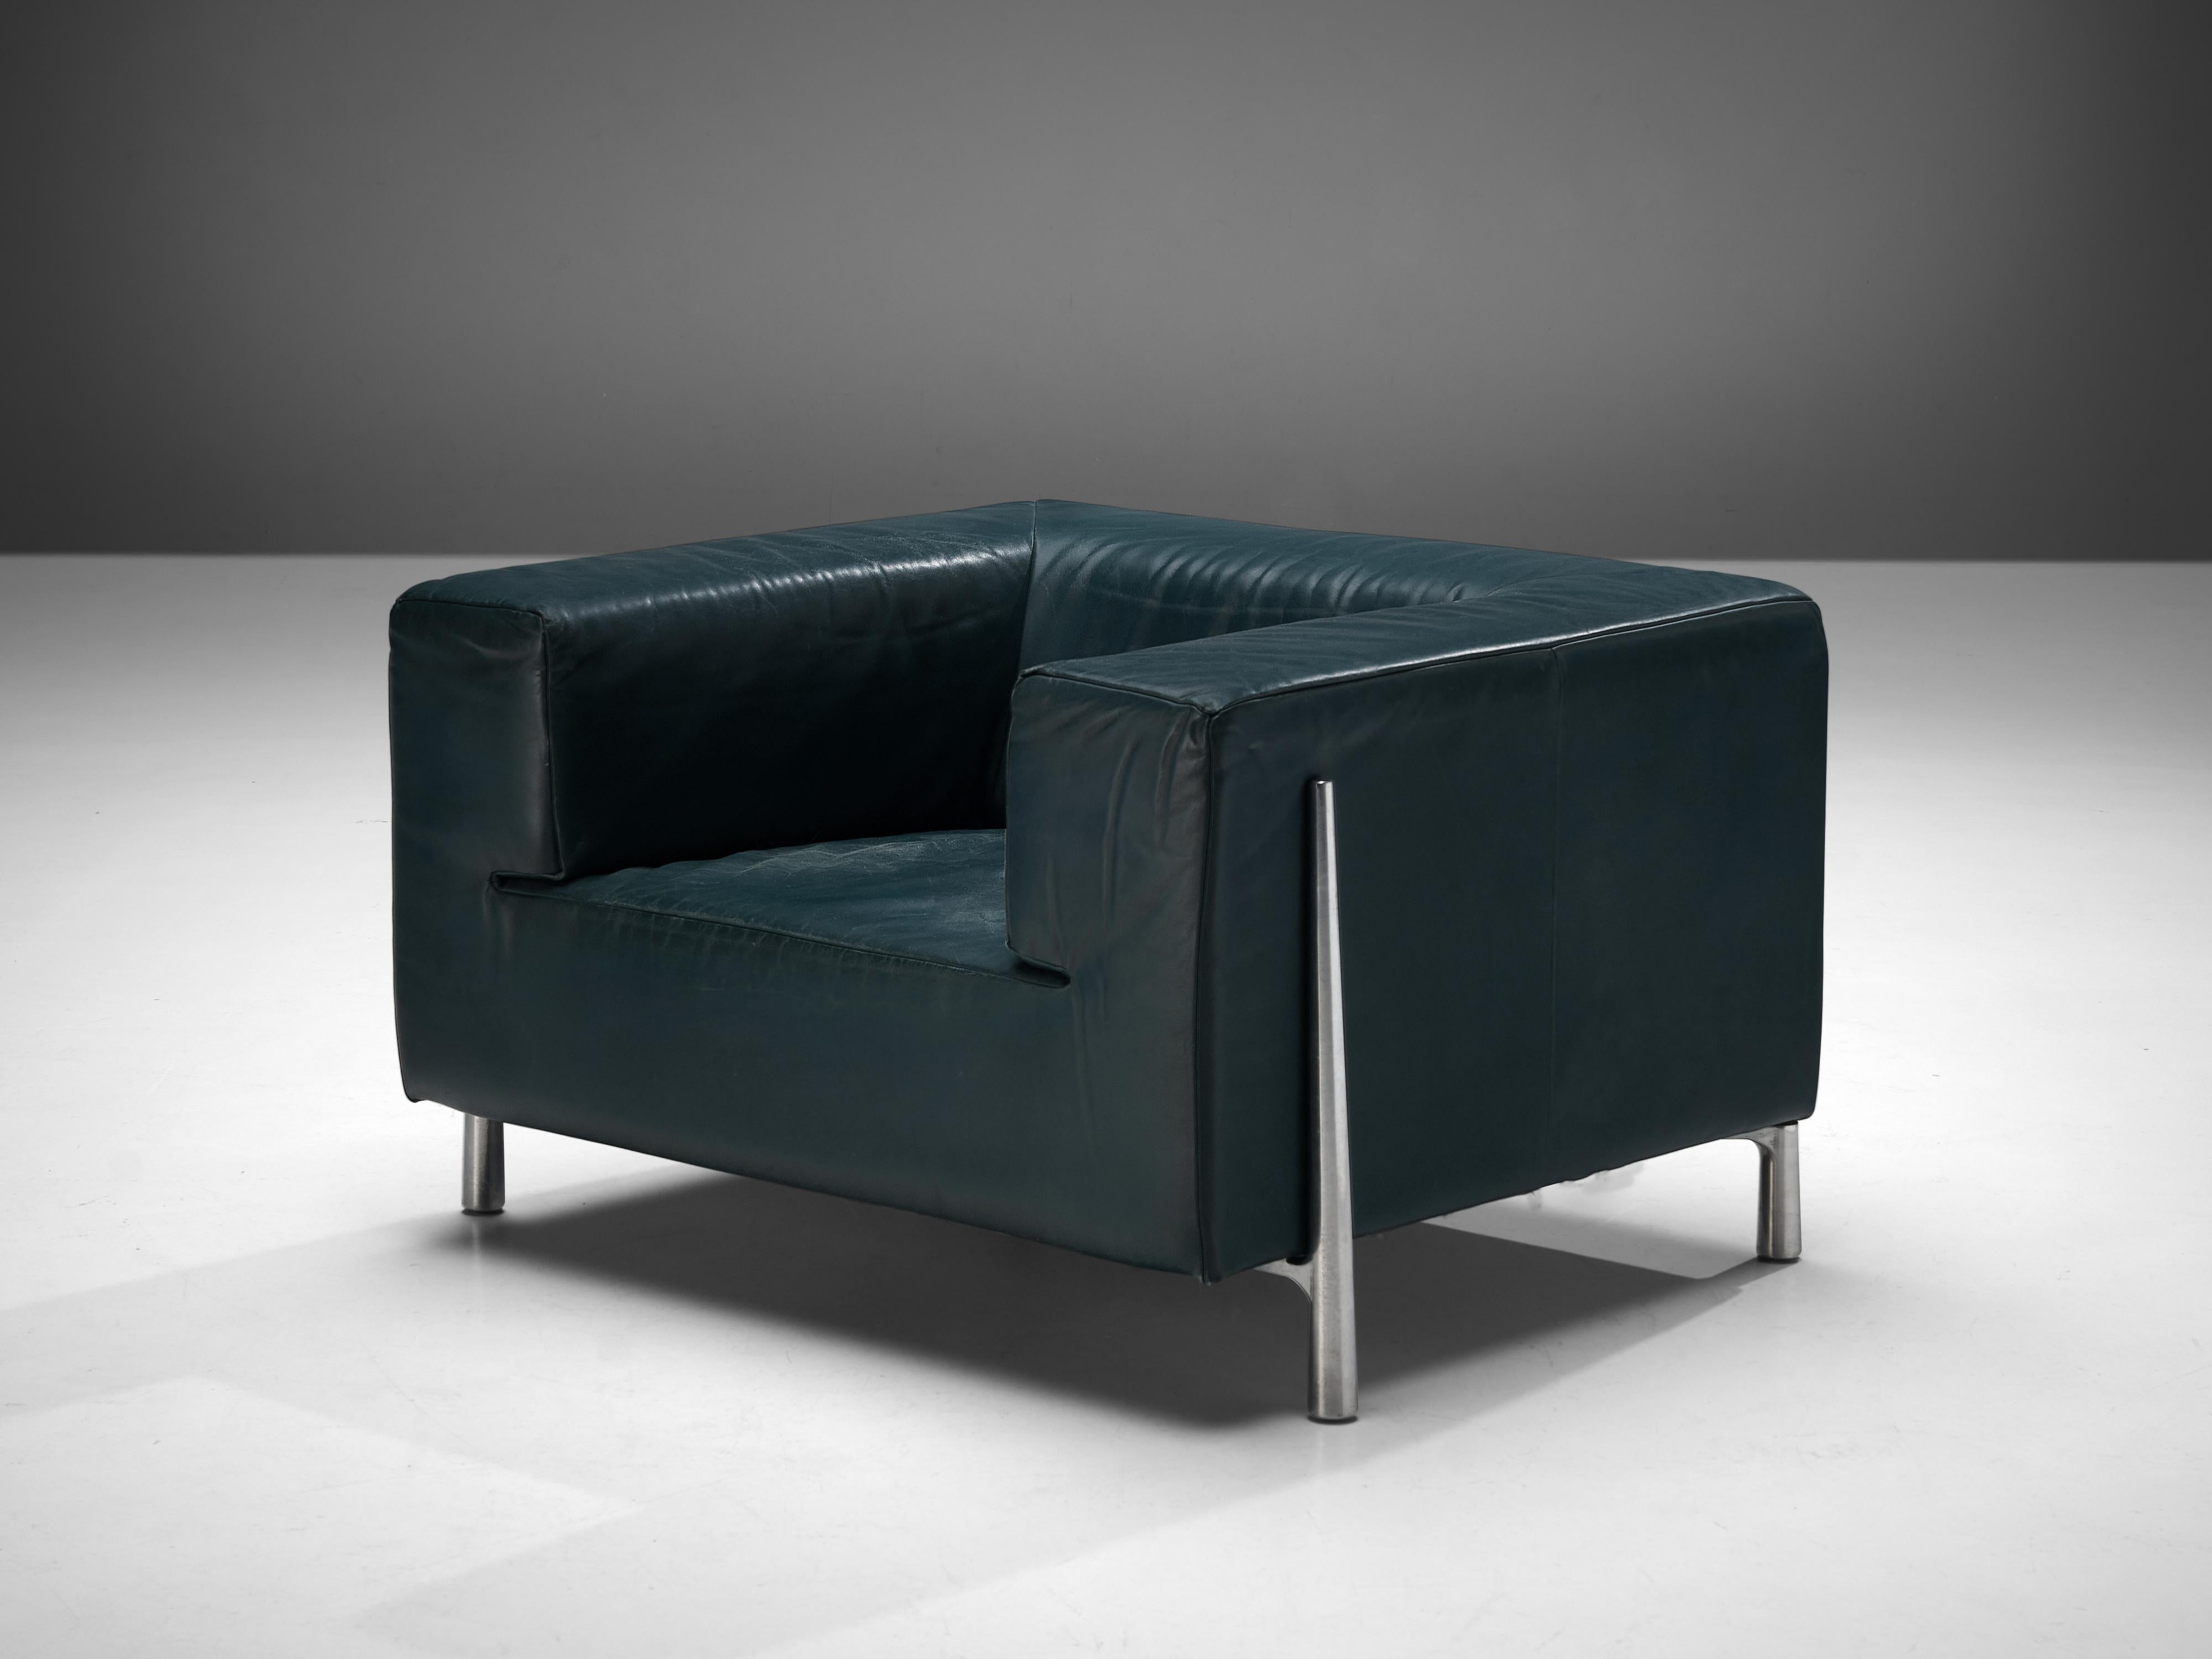 Lounge chair, steel, leather, Europe, 1970s

This cubic armchair show elegant steel details. The combination of steel and leather gives the lounge chair a modern and sophisticated look. This is being emphasized by the nice color of the leather